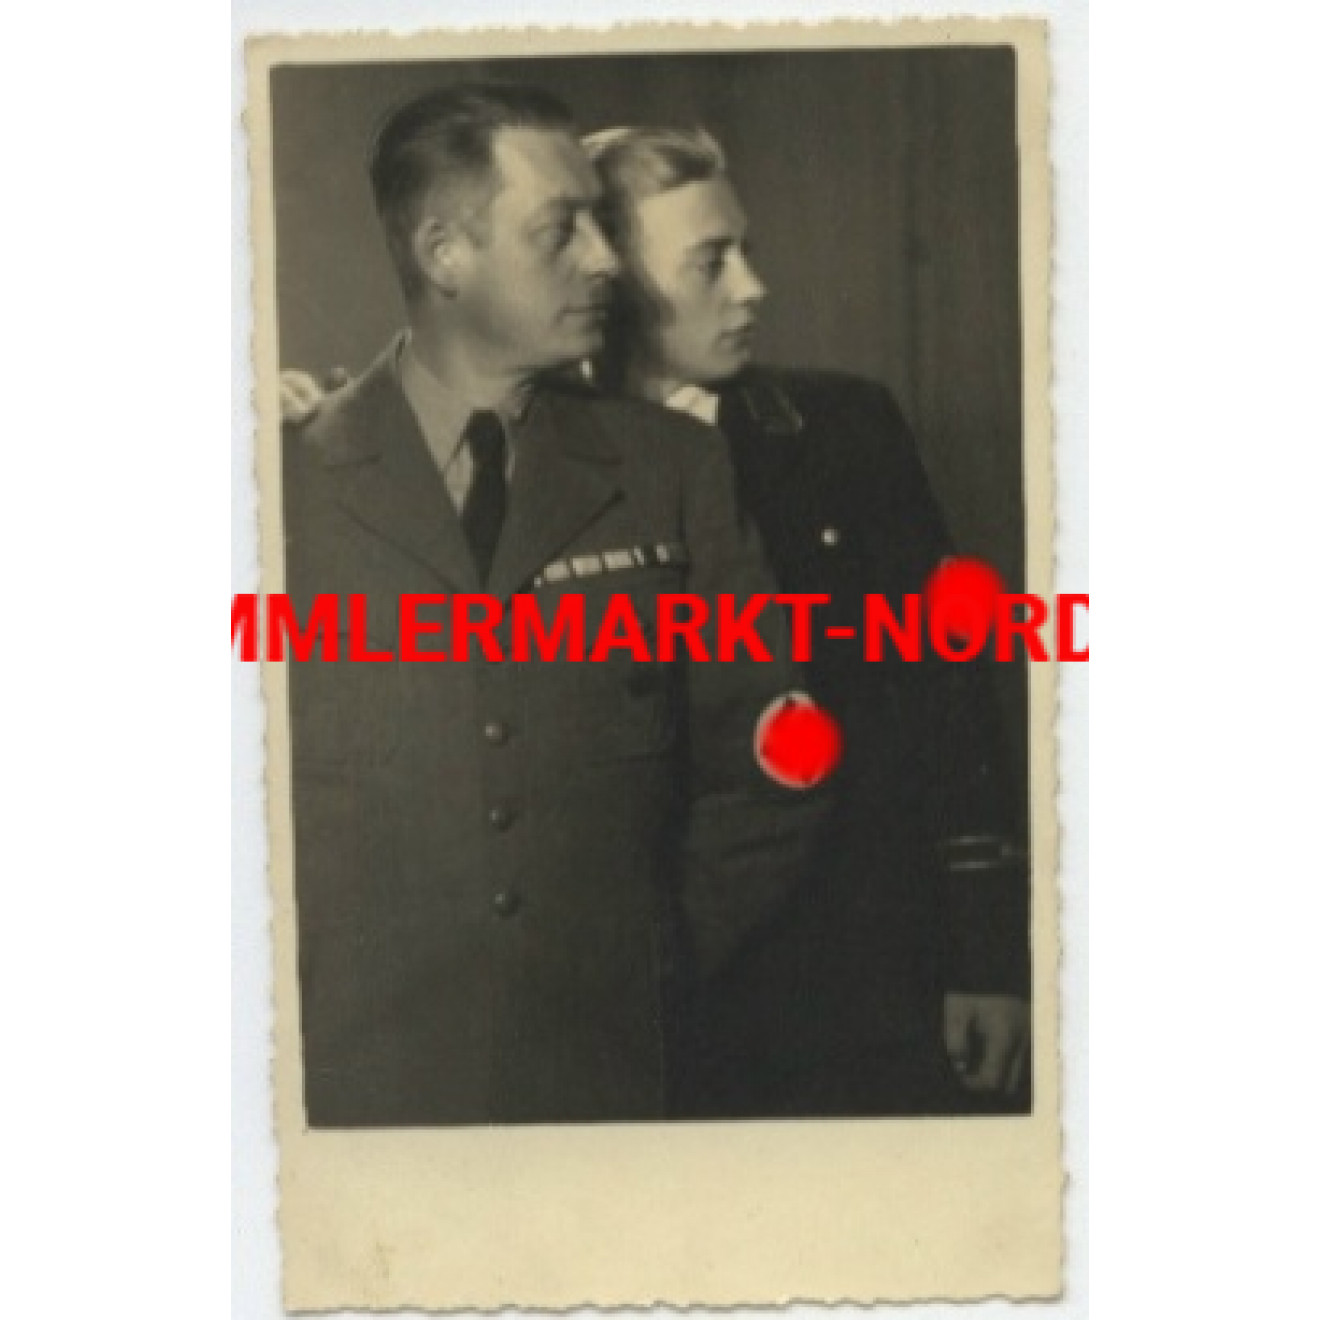 SS soldier - TK Standarte "Oberbayern" with his father